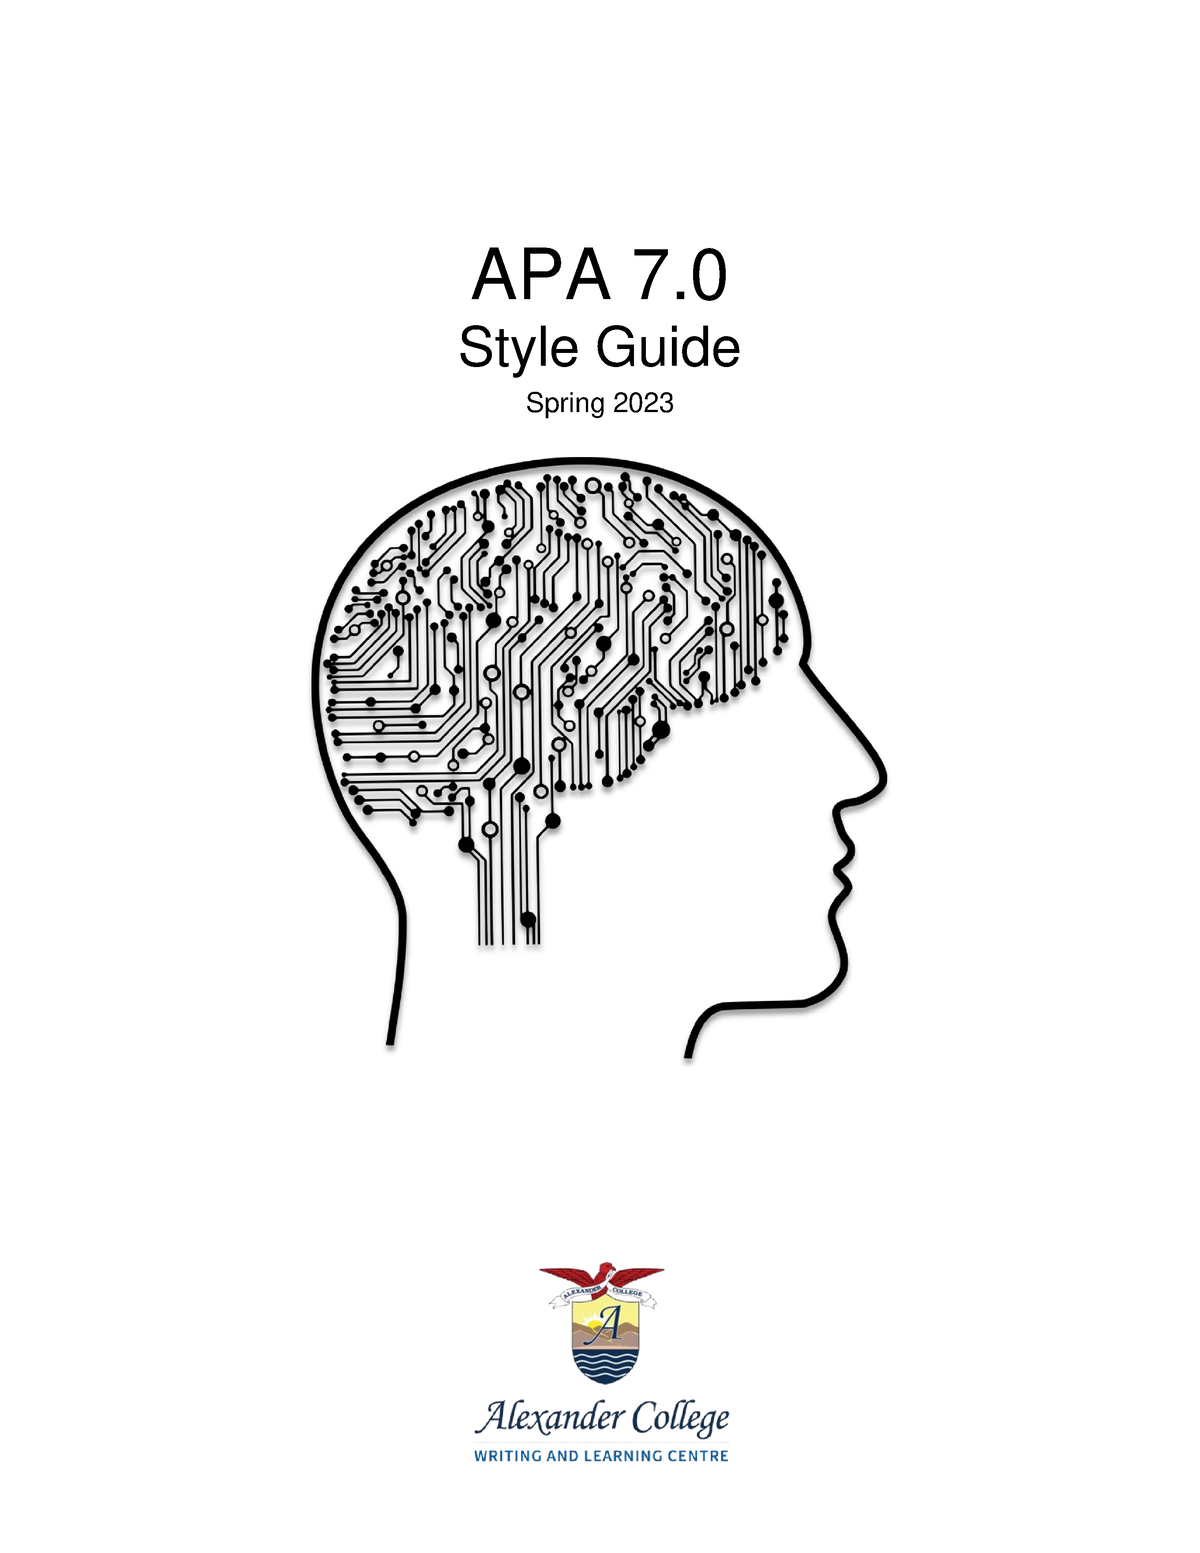 Apa Style Guide Spring 2023 Apa 7 Style Guide Spring 2023 Table Of Contents Welcome To Apa 